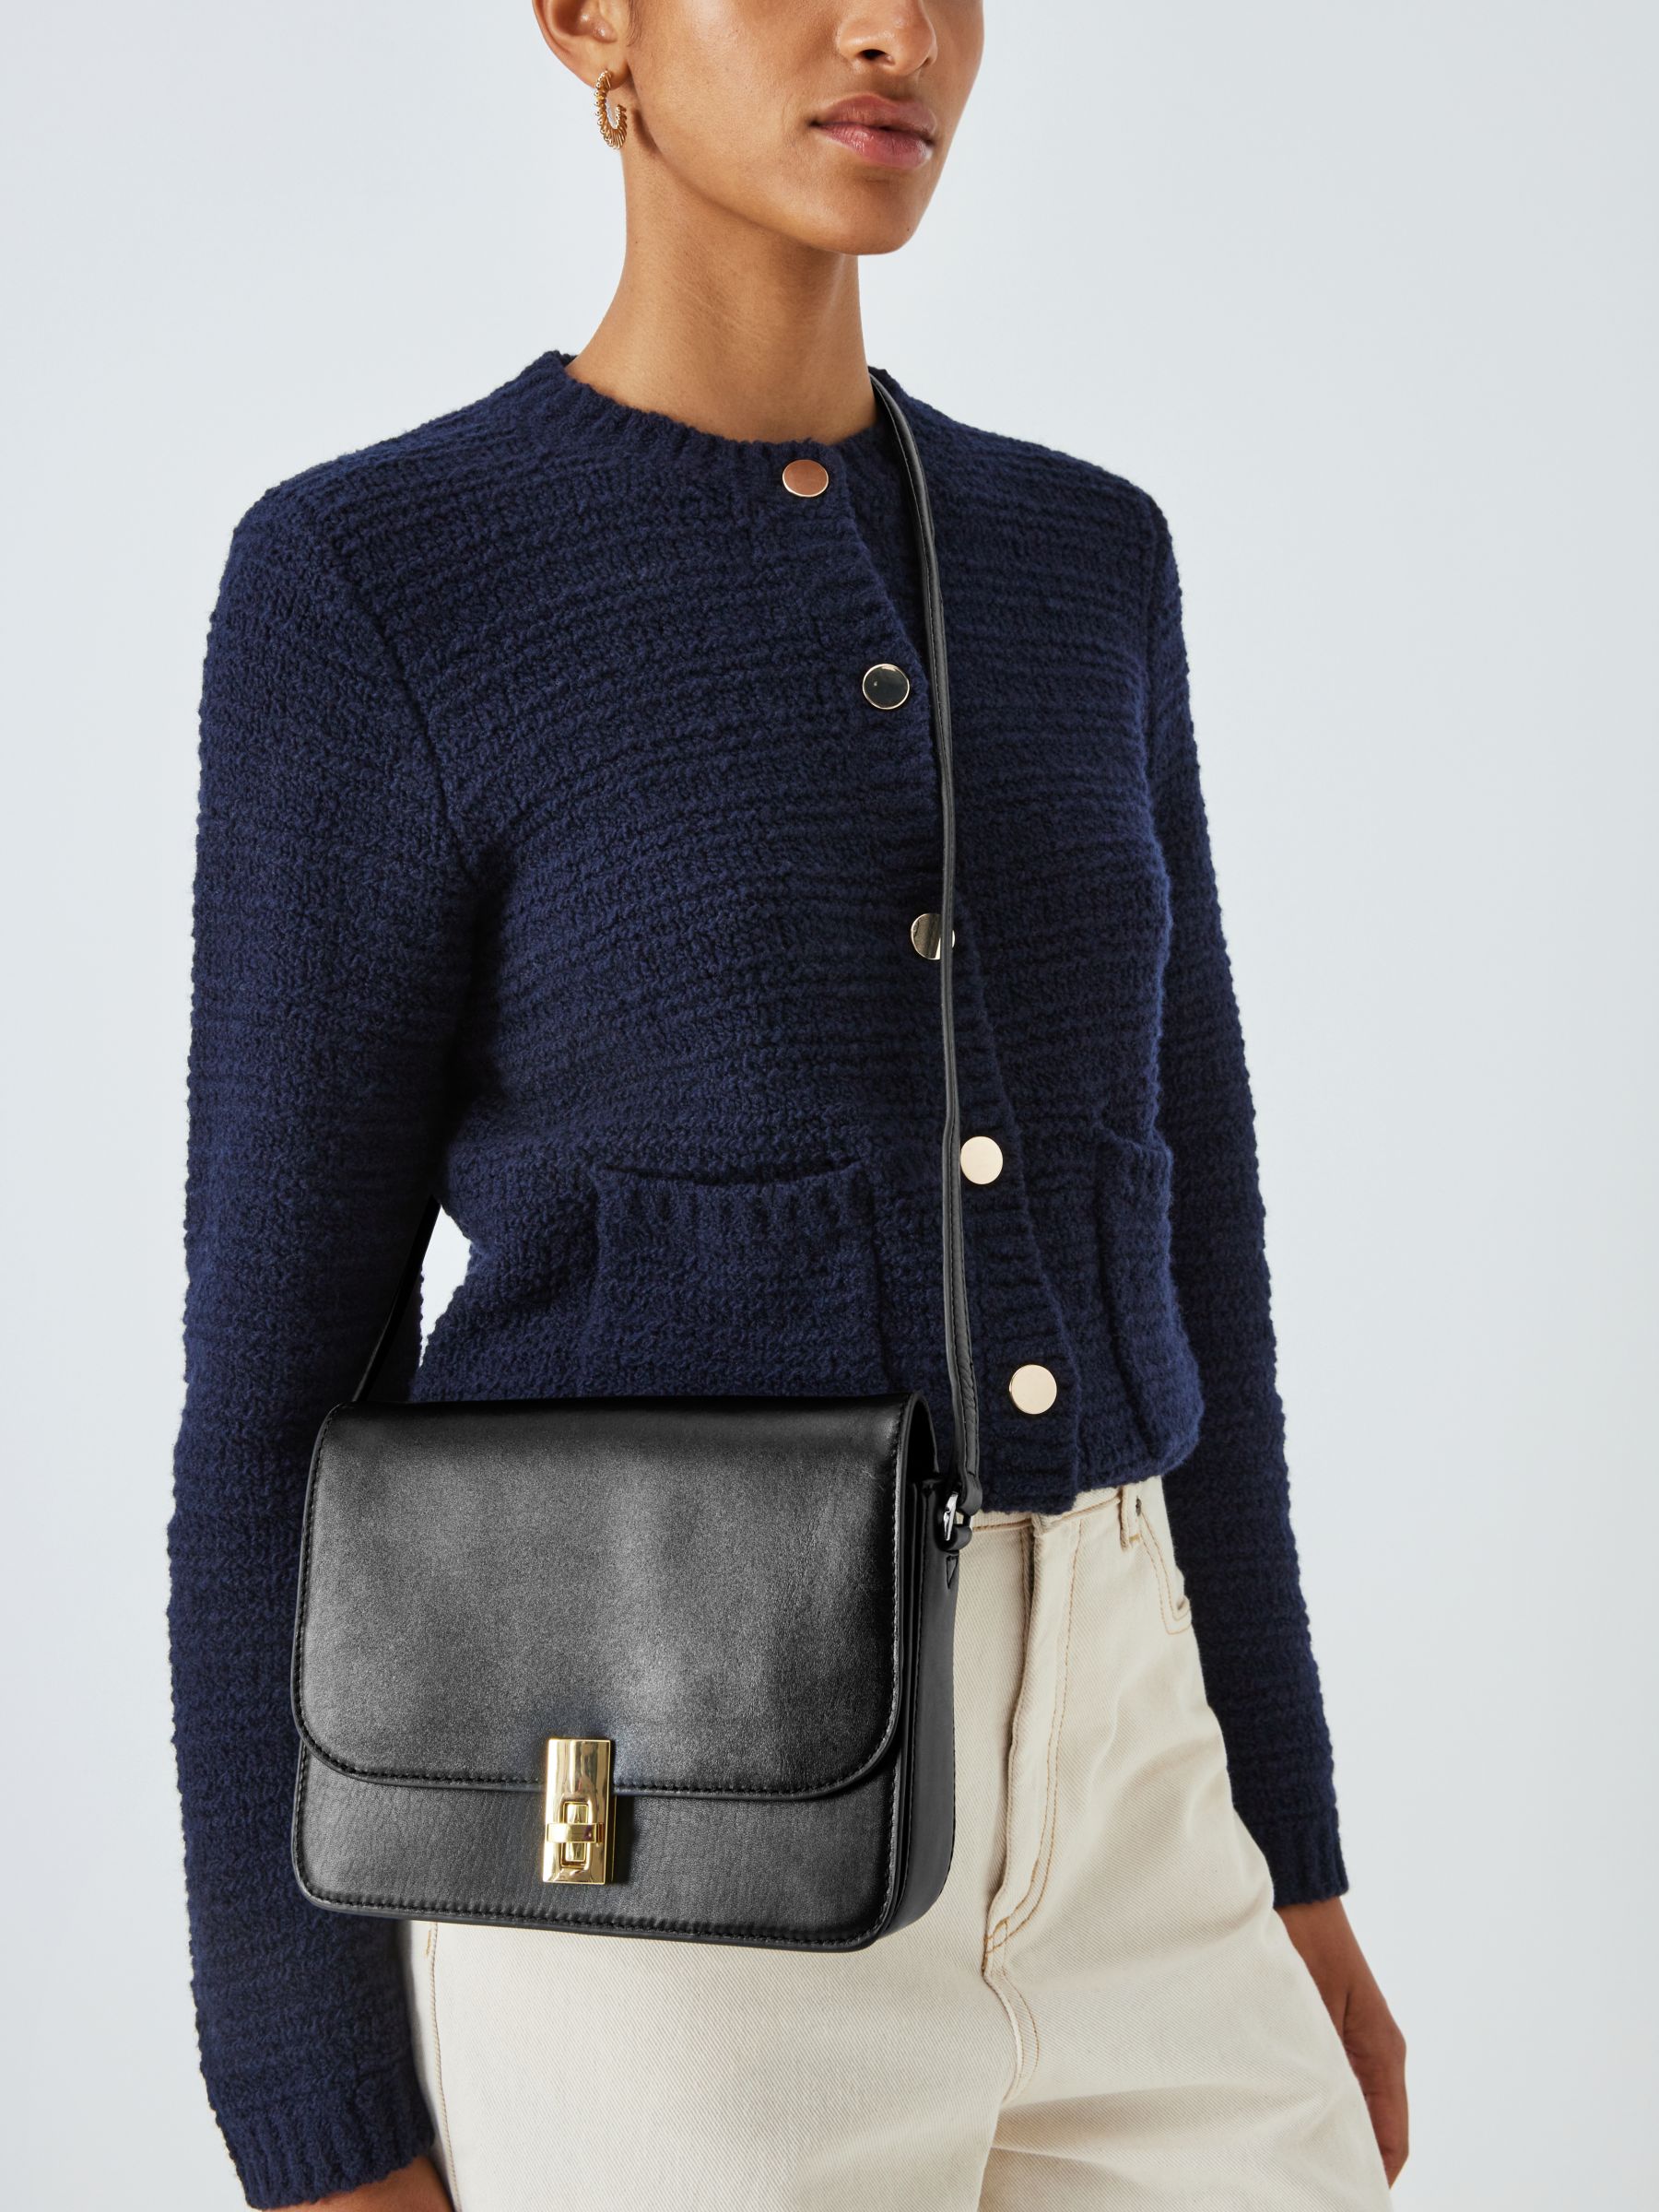 Buy John Lewis Smooth Leather Flapover Cross Body Bag Online at johnlewis.com